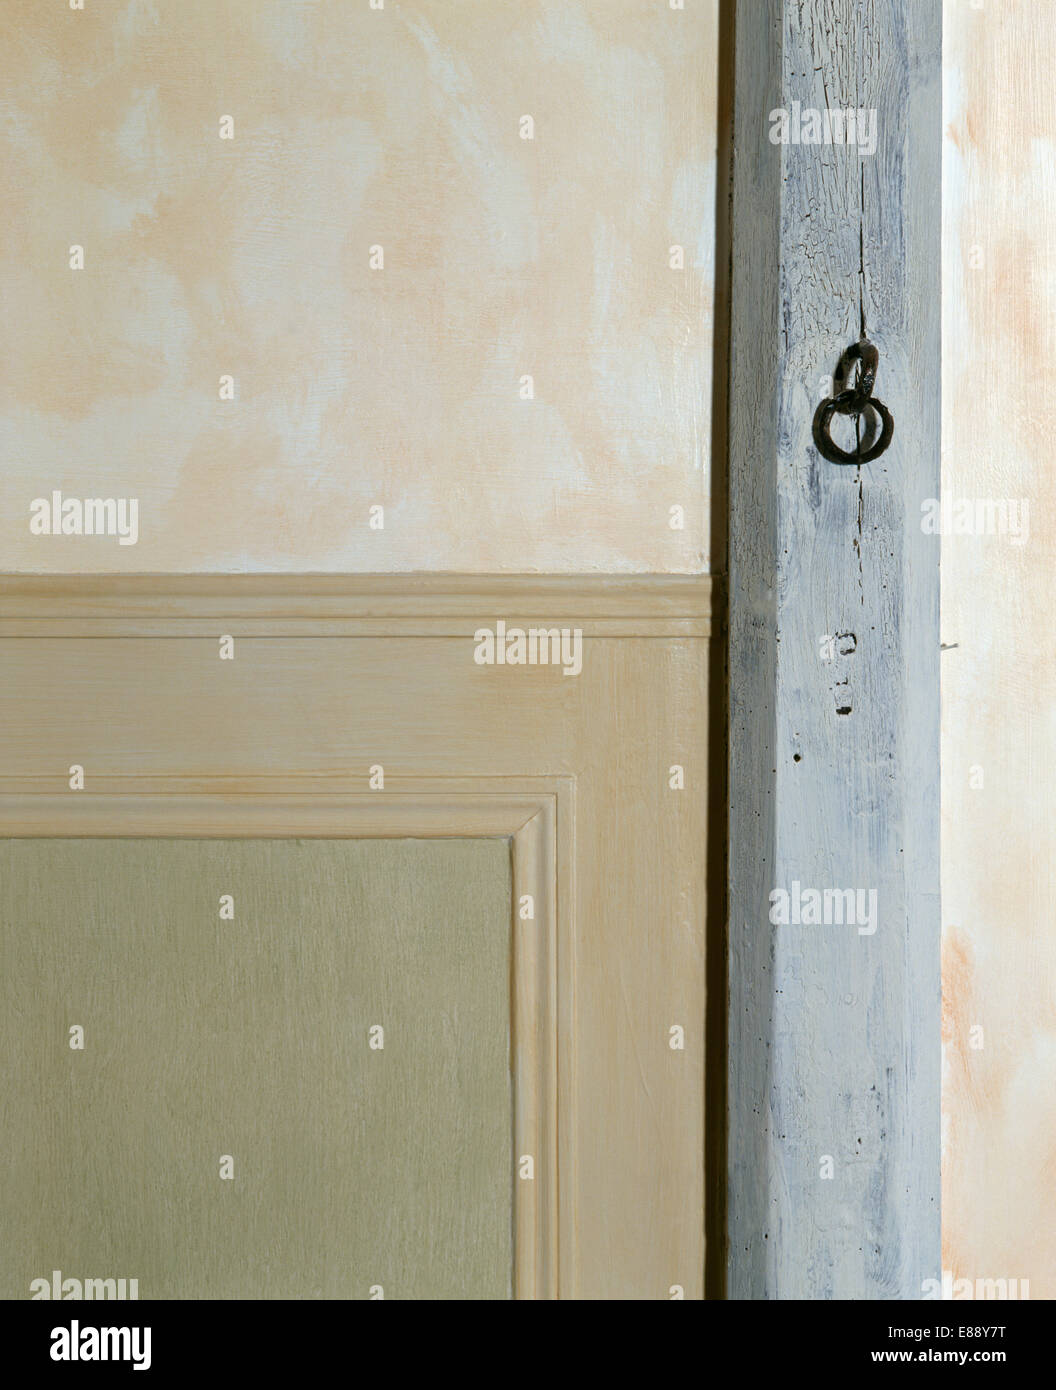 Close-up of sponging effect wall and dado panelling Stock Photo